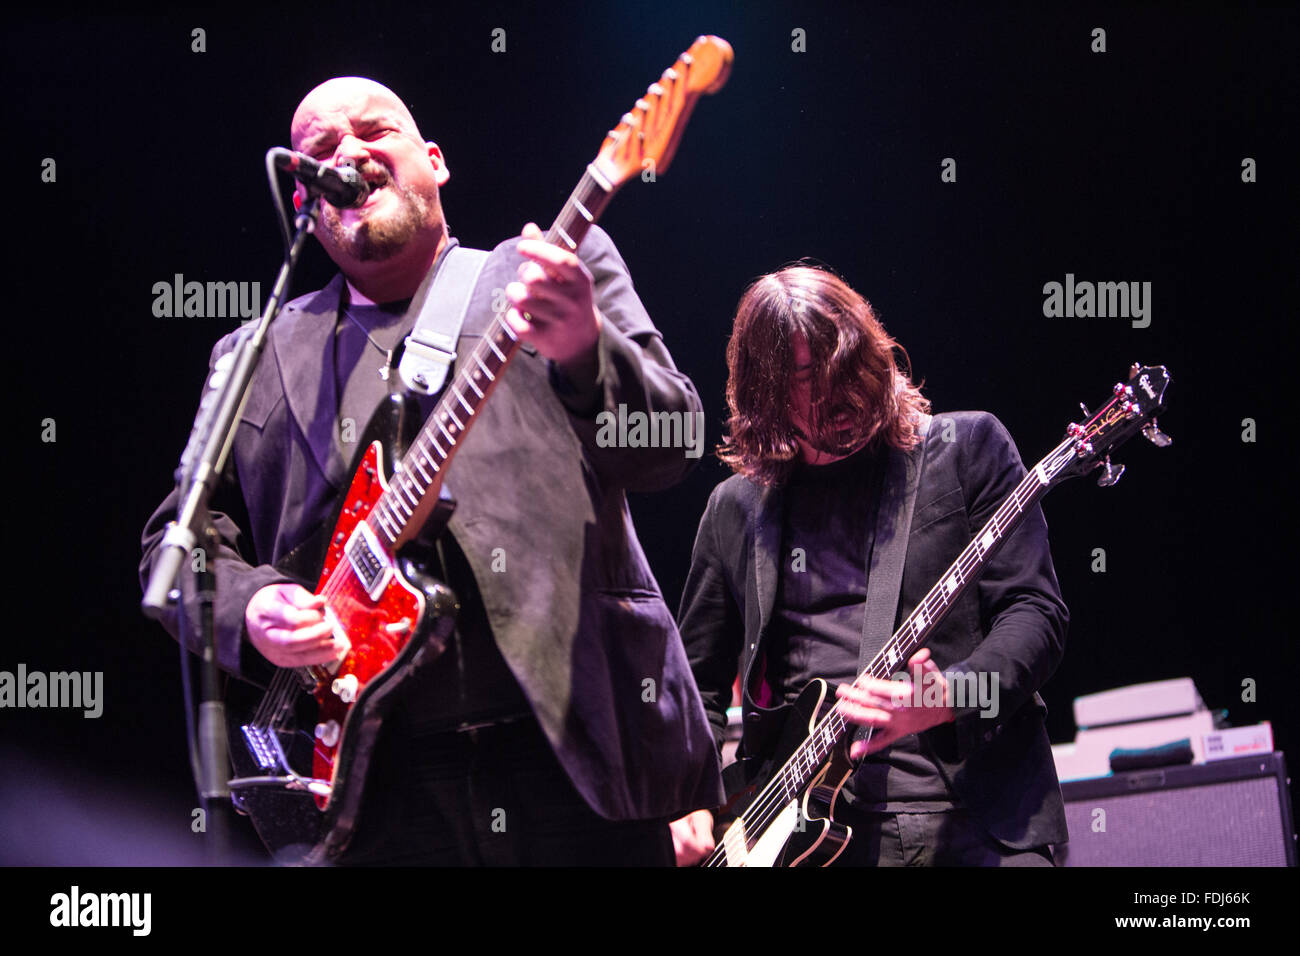 Alain Johannes singing and playing guitar with Dave Grohl in the background Stock Photo